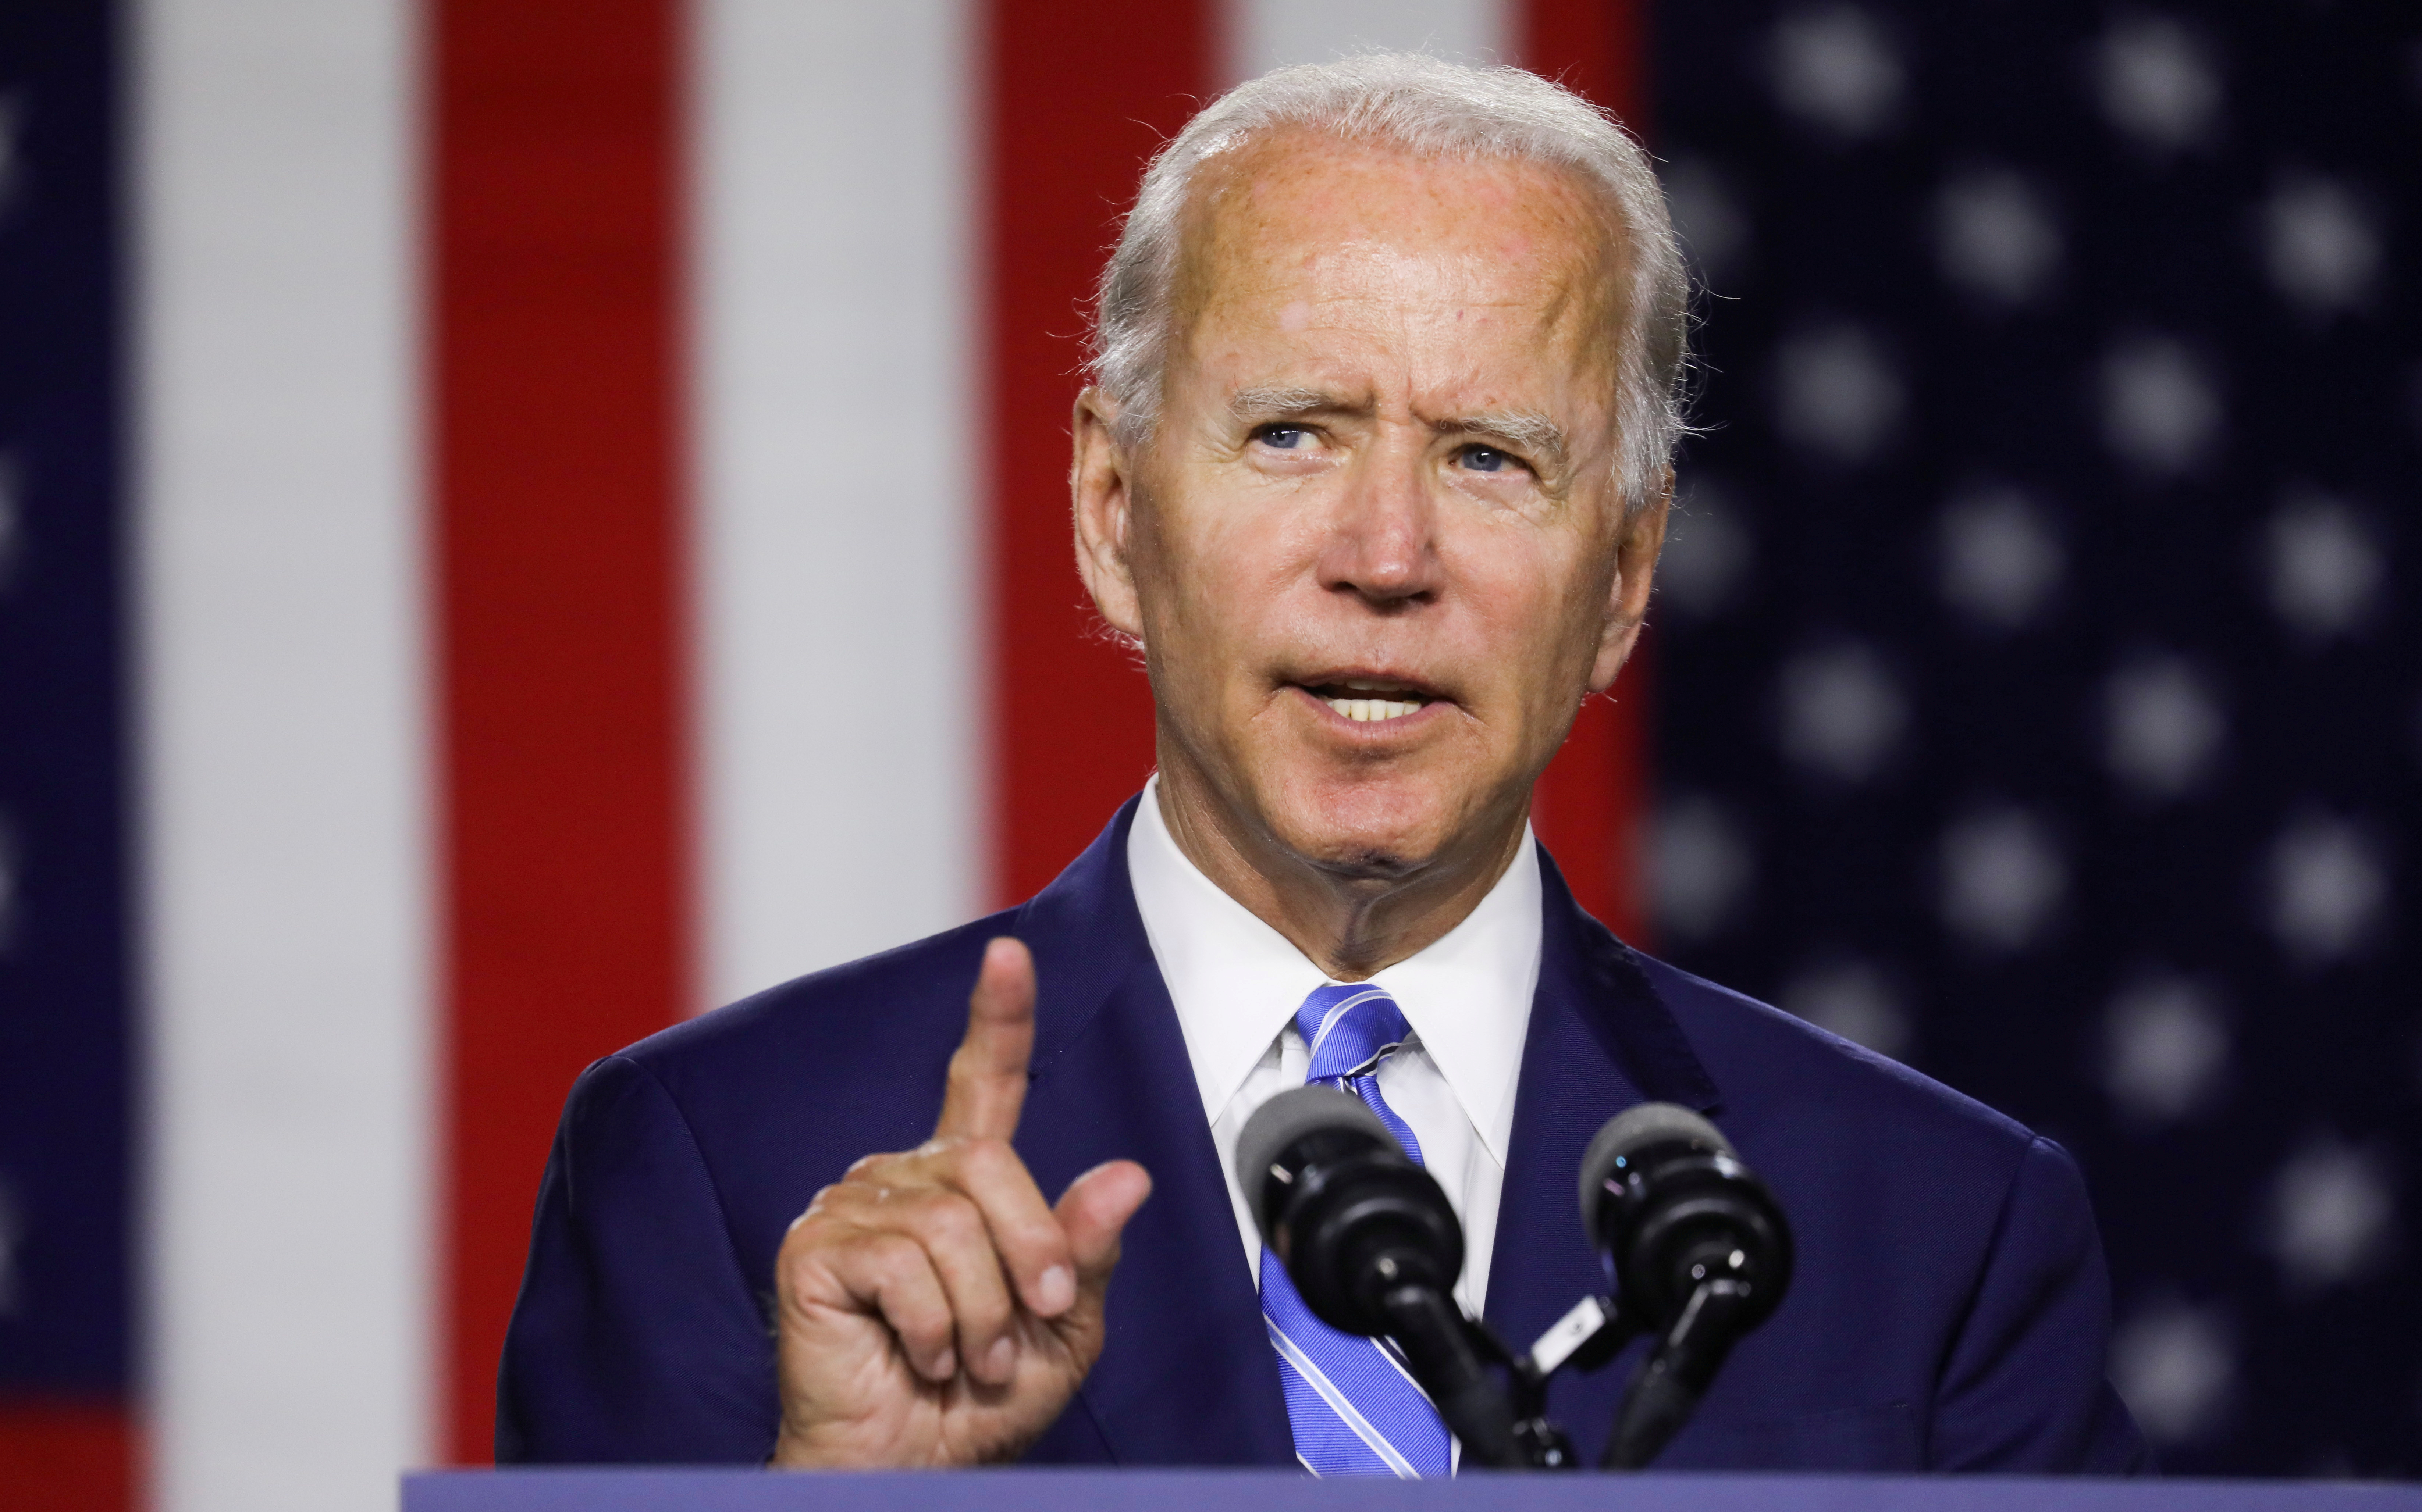 FILE PHOTO: Democratic U.S. presidential candidate and former Vice President Joe Biden speaks during a campaign event in Wilmington, Delaware, U.S., July 14, 2020. REUTERS/Leah Millis/File Photo